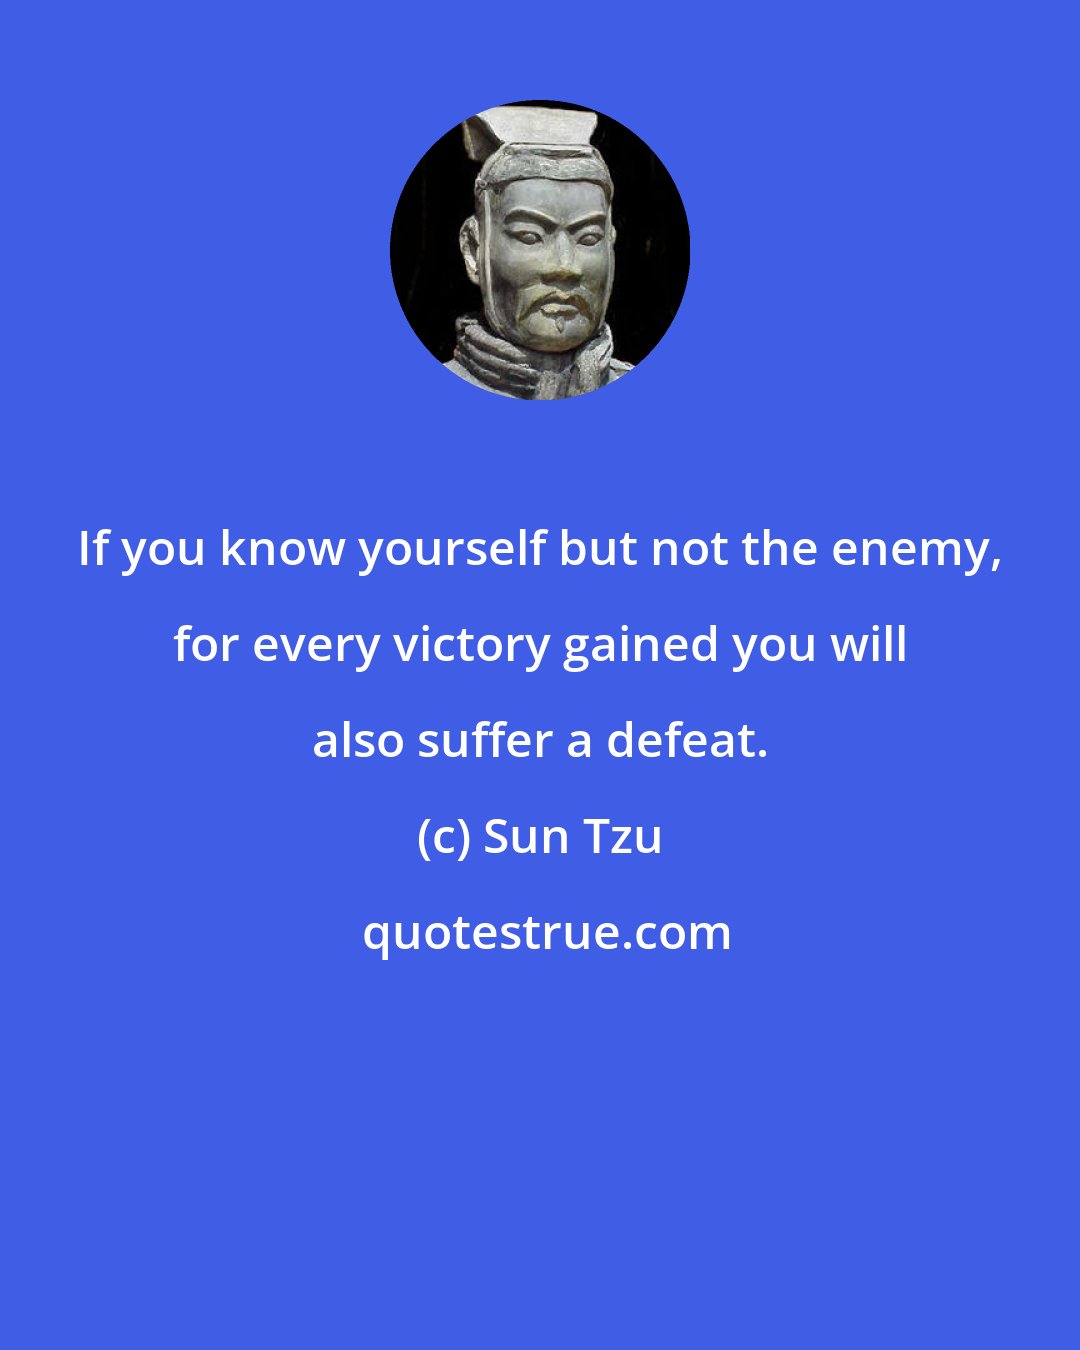 Sun Tzu: If you know yourself but not the enemy, for every victory gained you will also suffer a defeat.